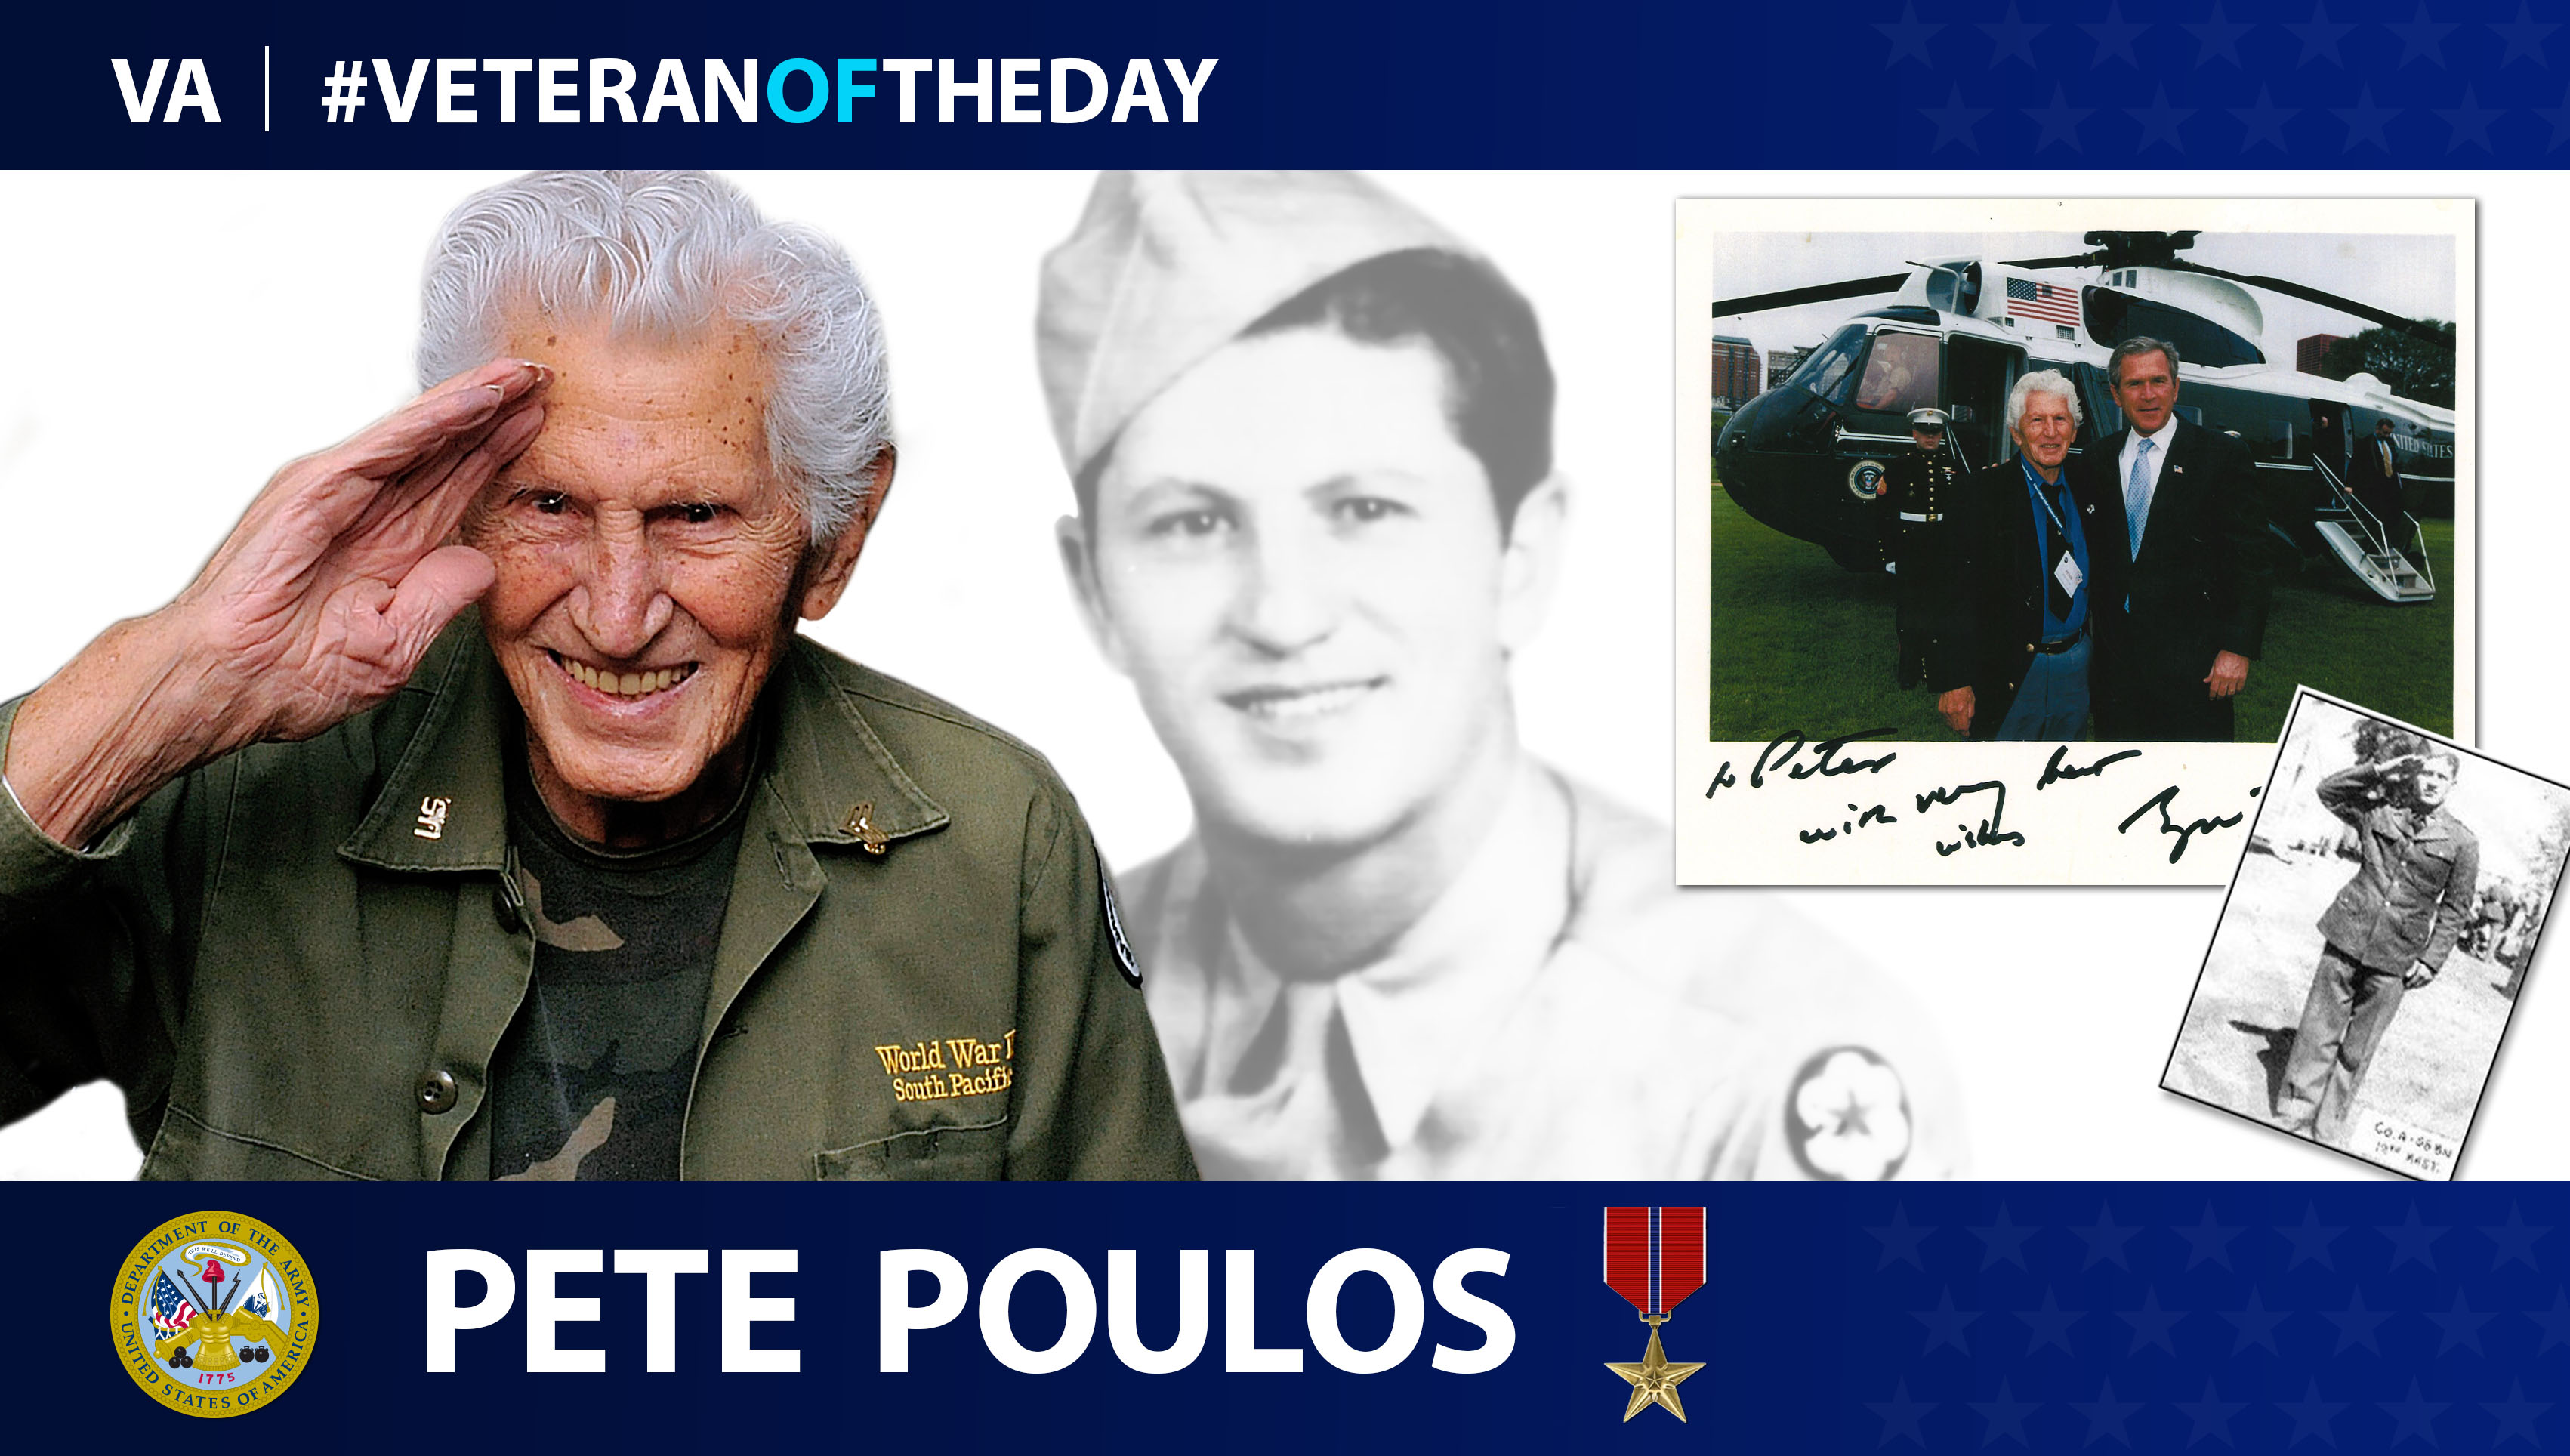 Army and WWII Veteran Pete Poulos is today's #VeteranOfTheDay.